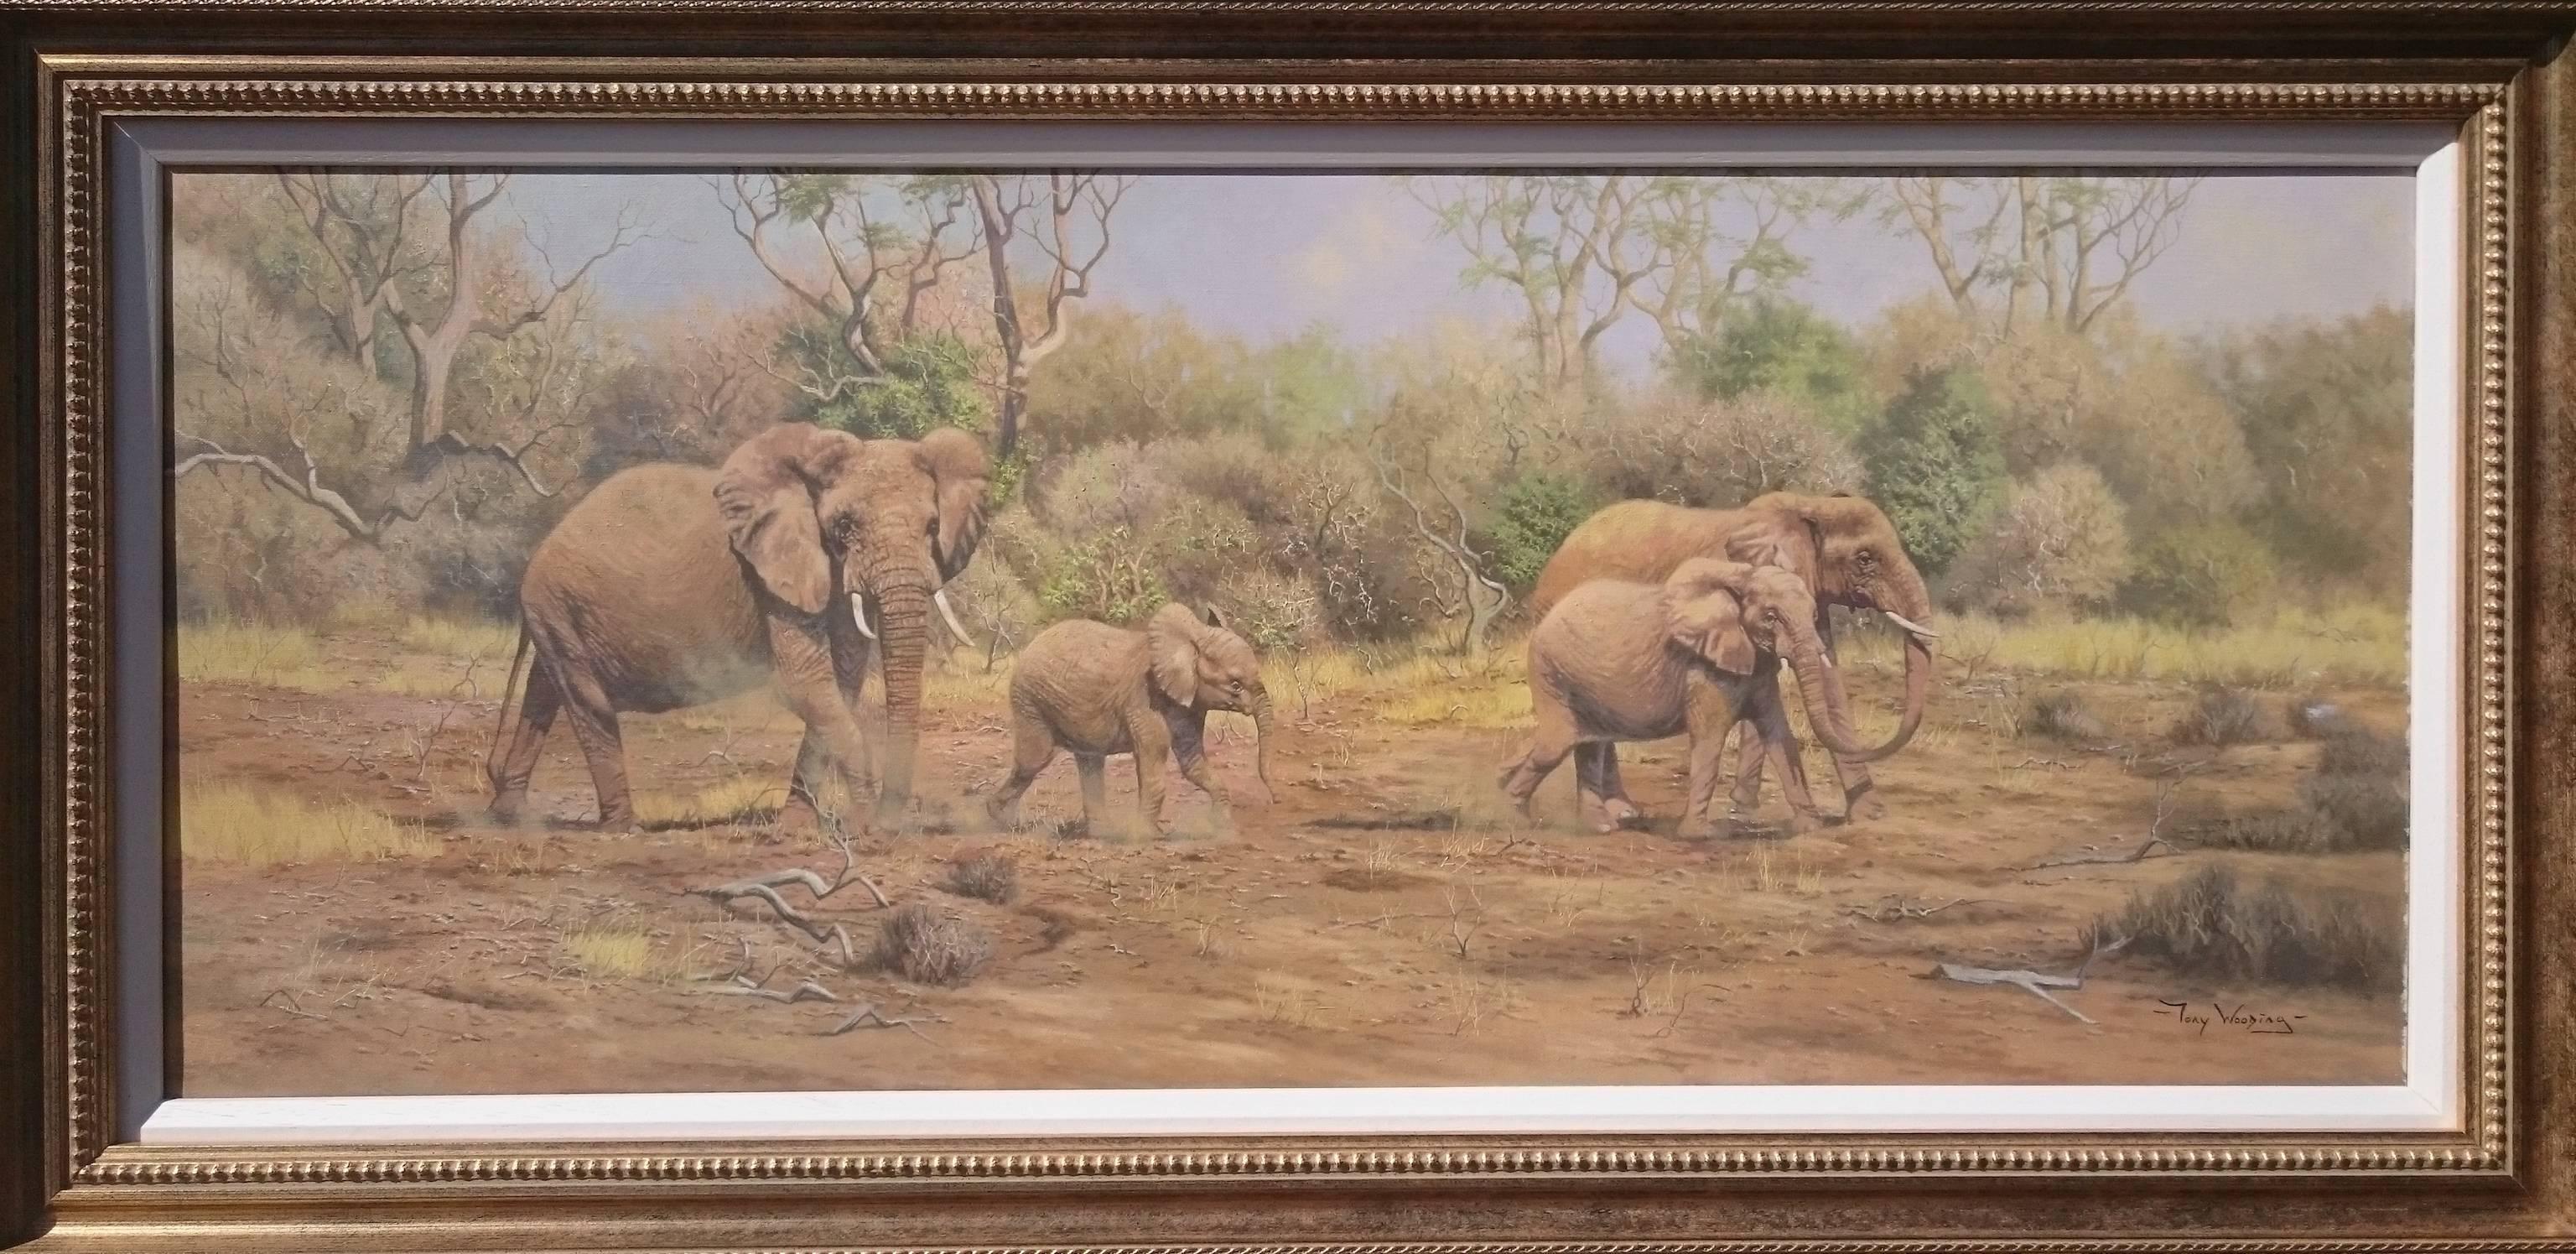 Painting of Elephants in an African Landscape by Tony Wooding In Excellent Condition For Sale In Gloucestershire, GB